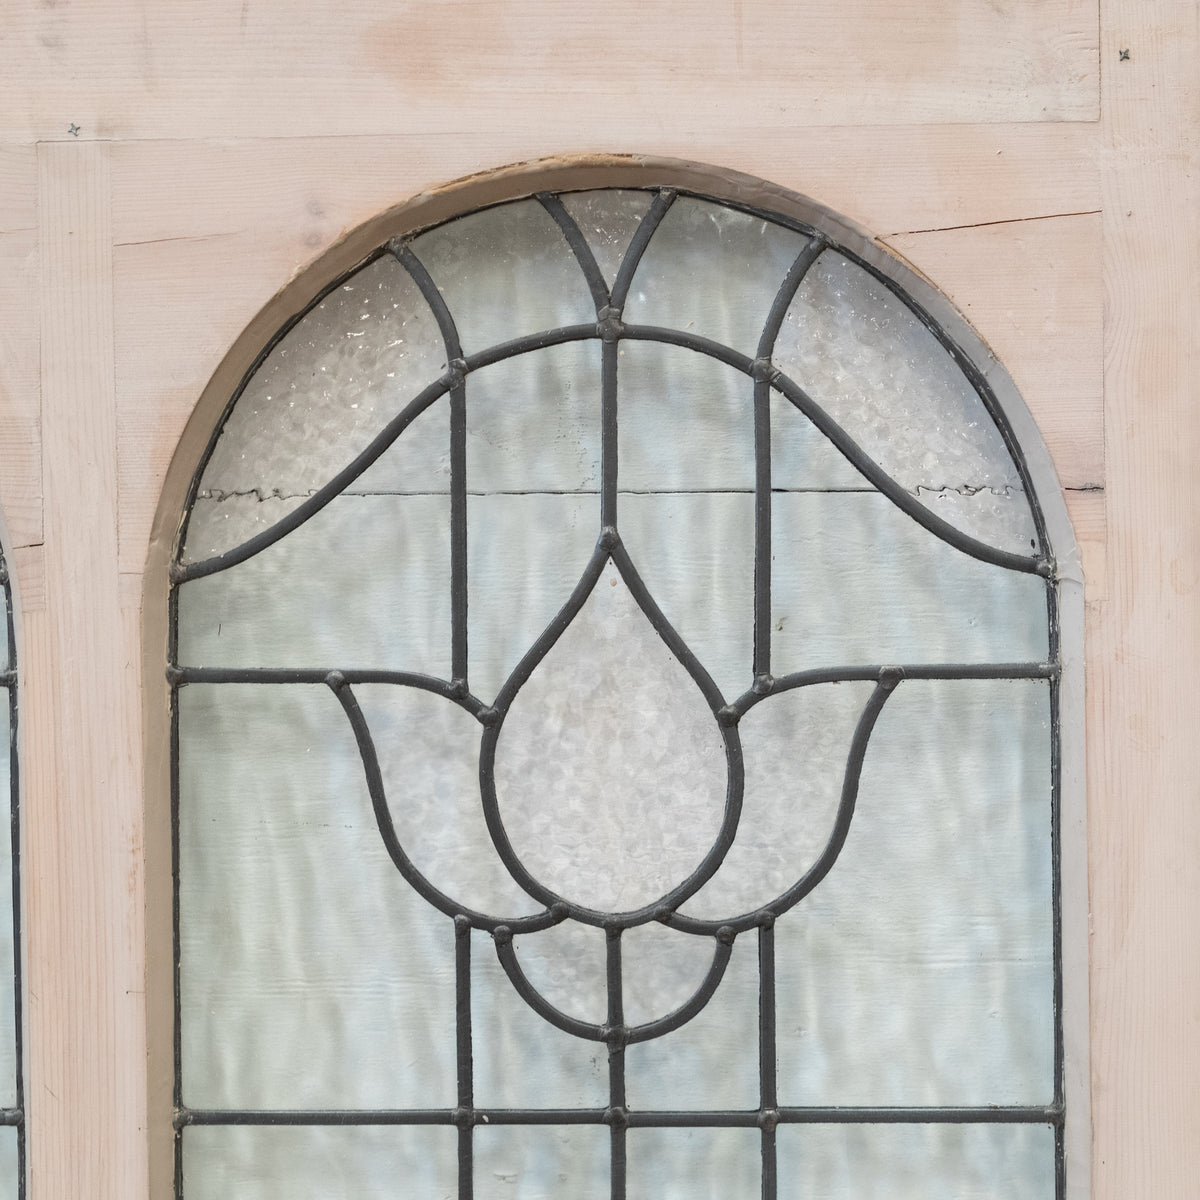 Reclaimed Stained Glass Arched Windows | Westminster Chapel | The Architectural Forum